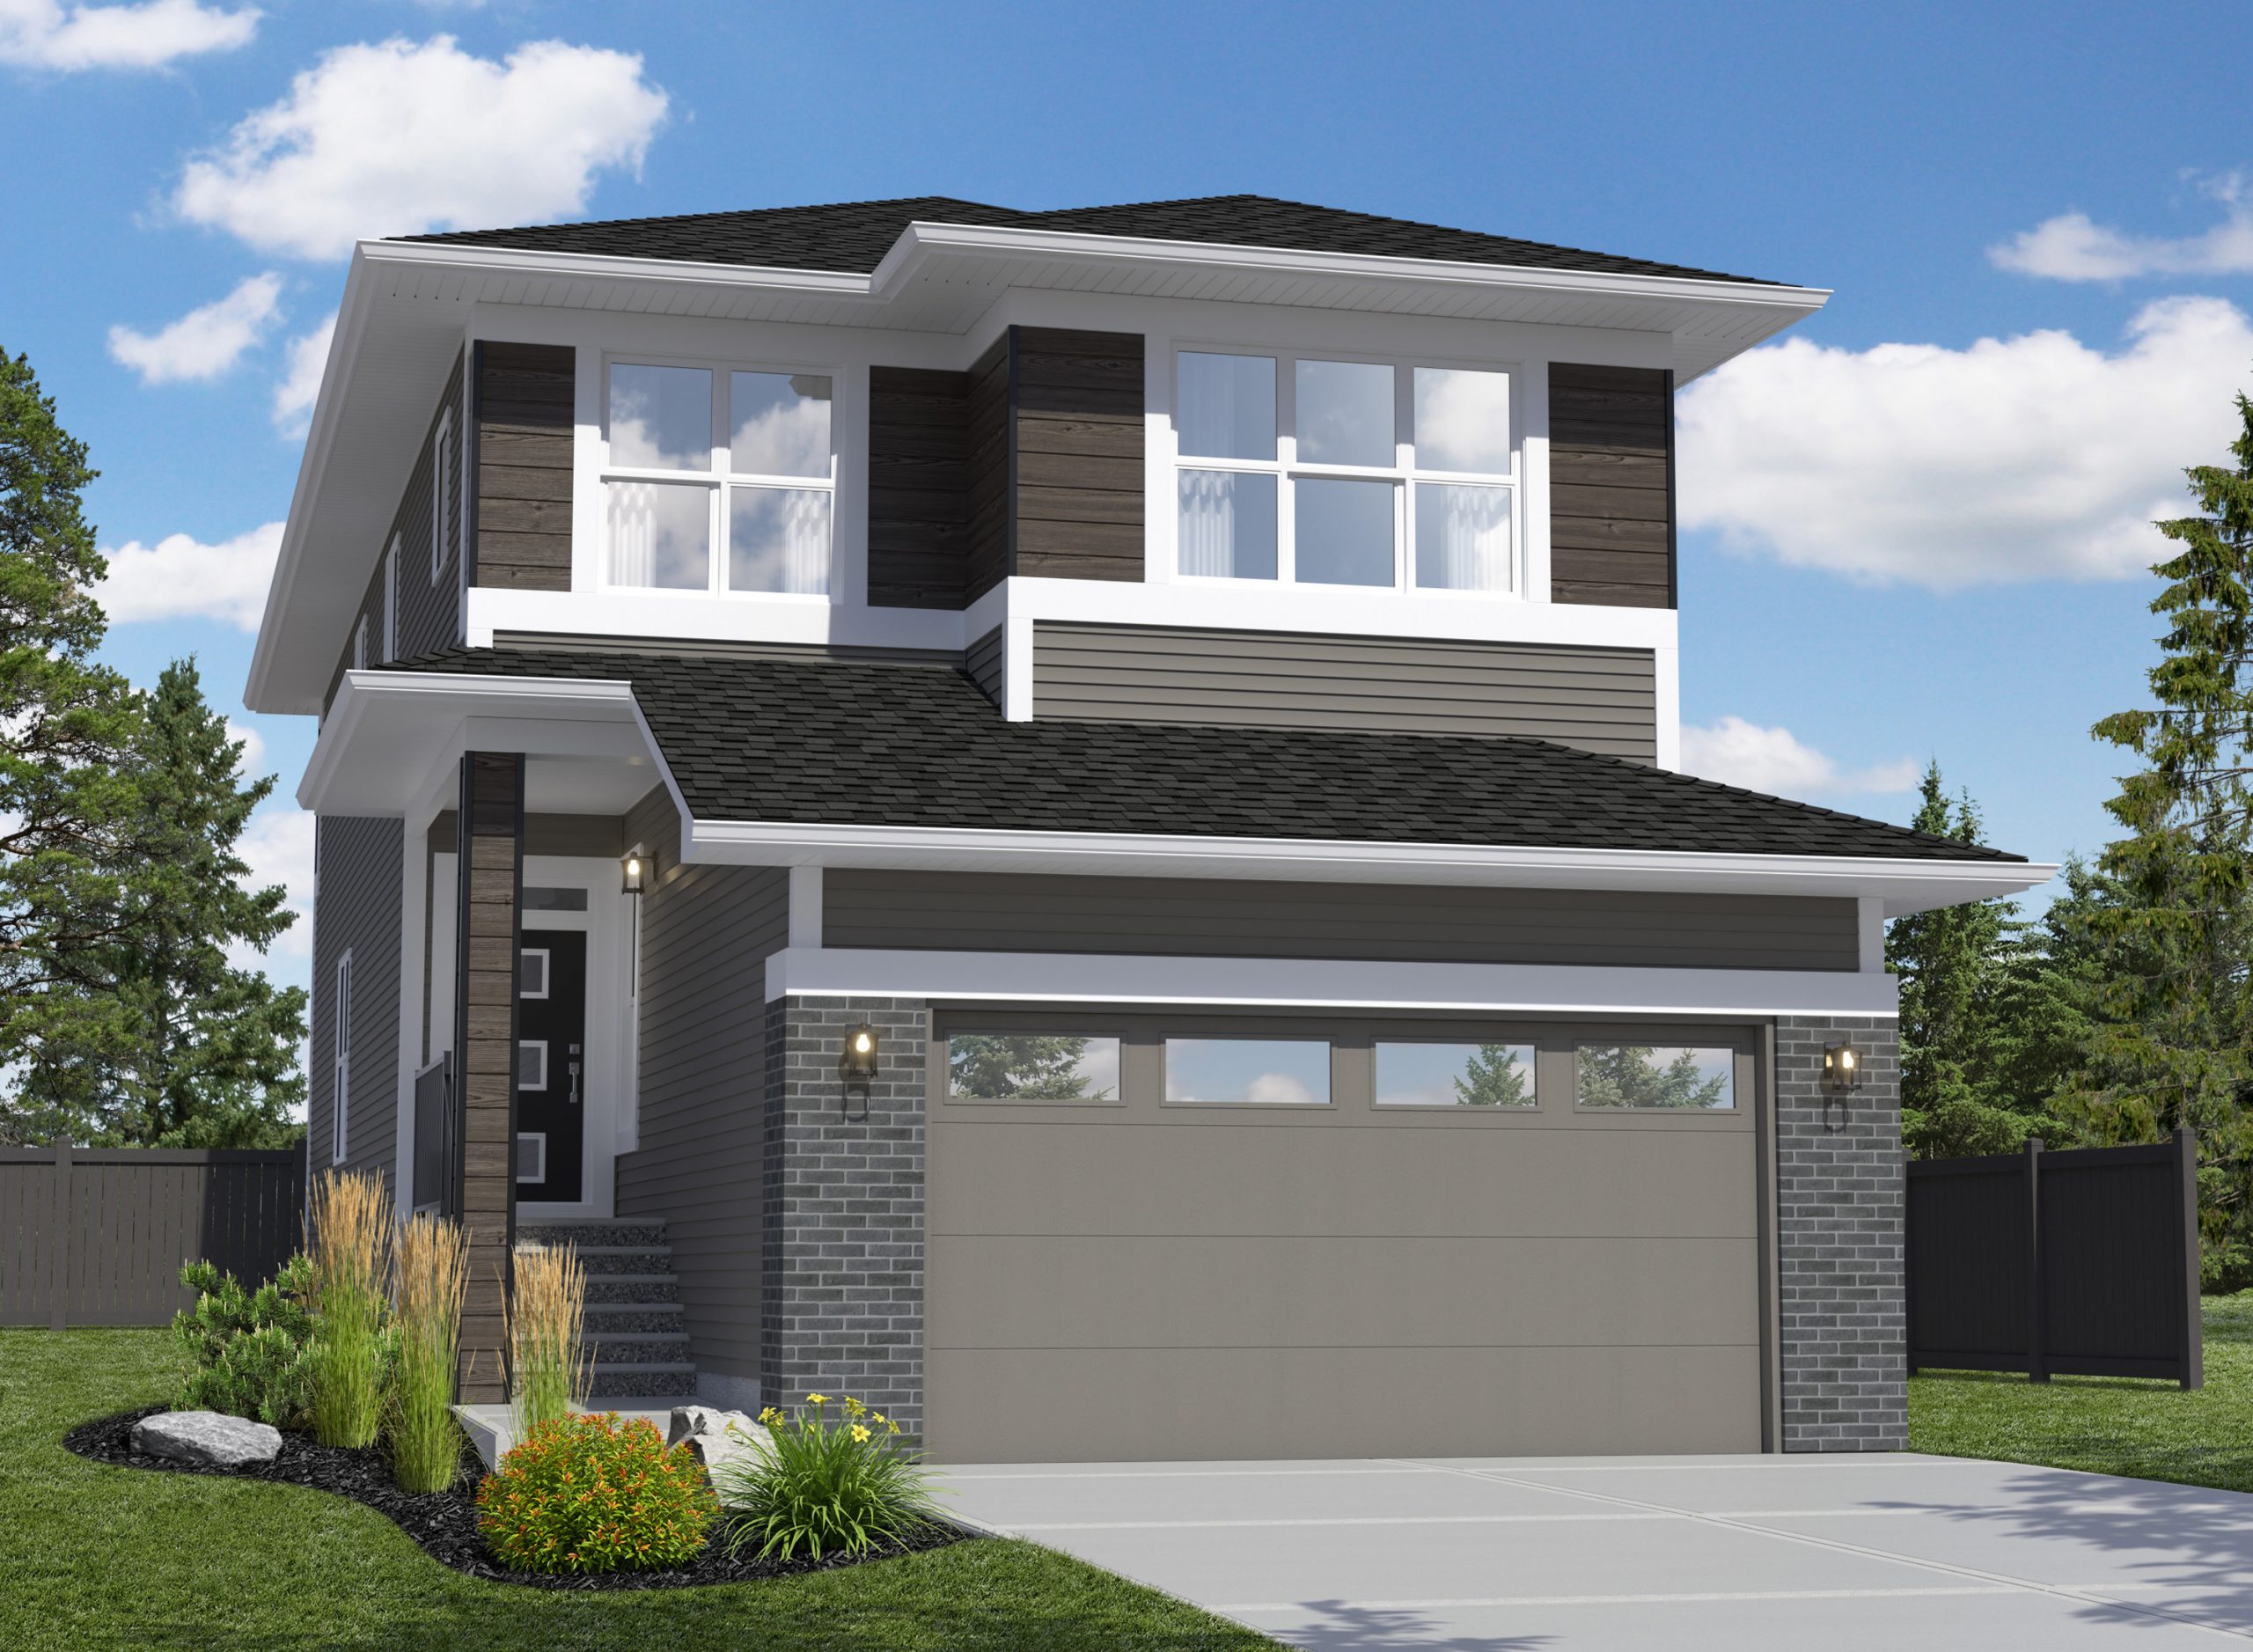 New Show Homes In Calgary | Seton by Brookfield Residential